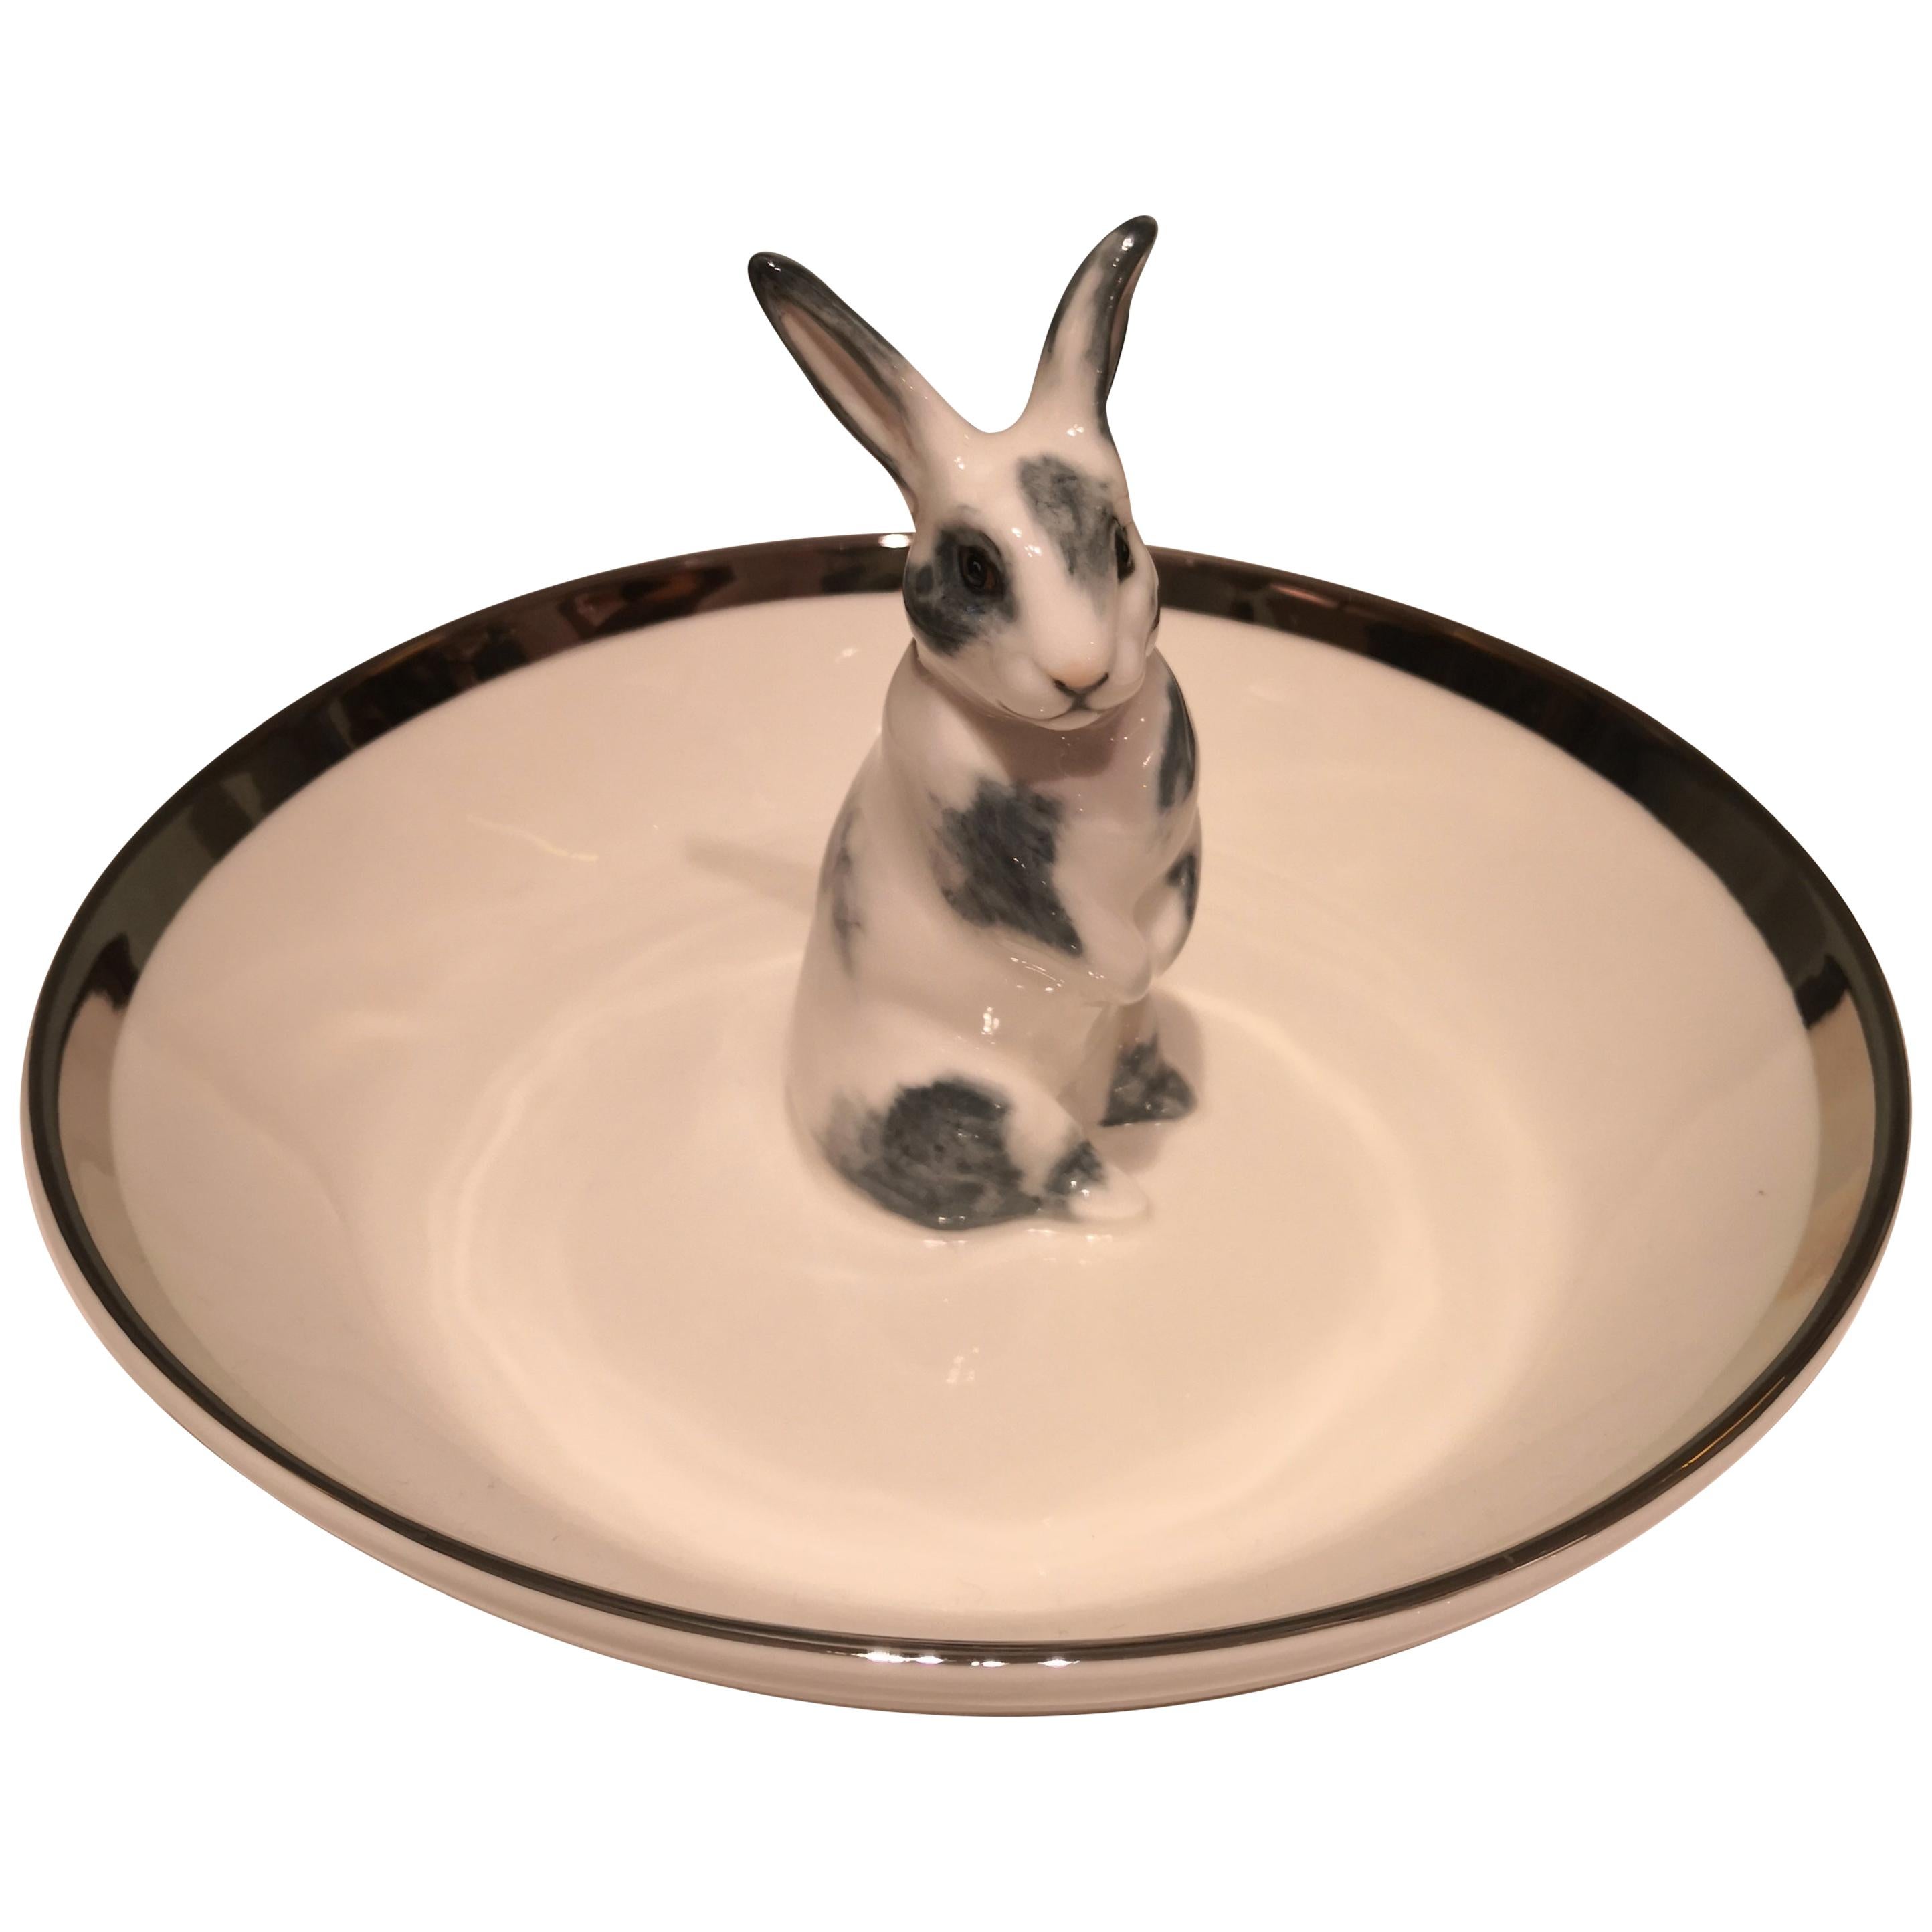 Country Style Porcelain Bowl with Bunny Figure Sofina Boutique Kitzbuehel